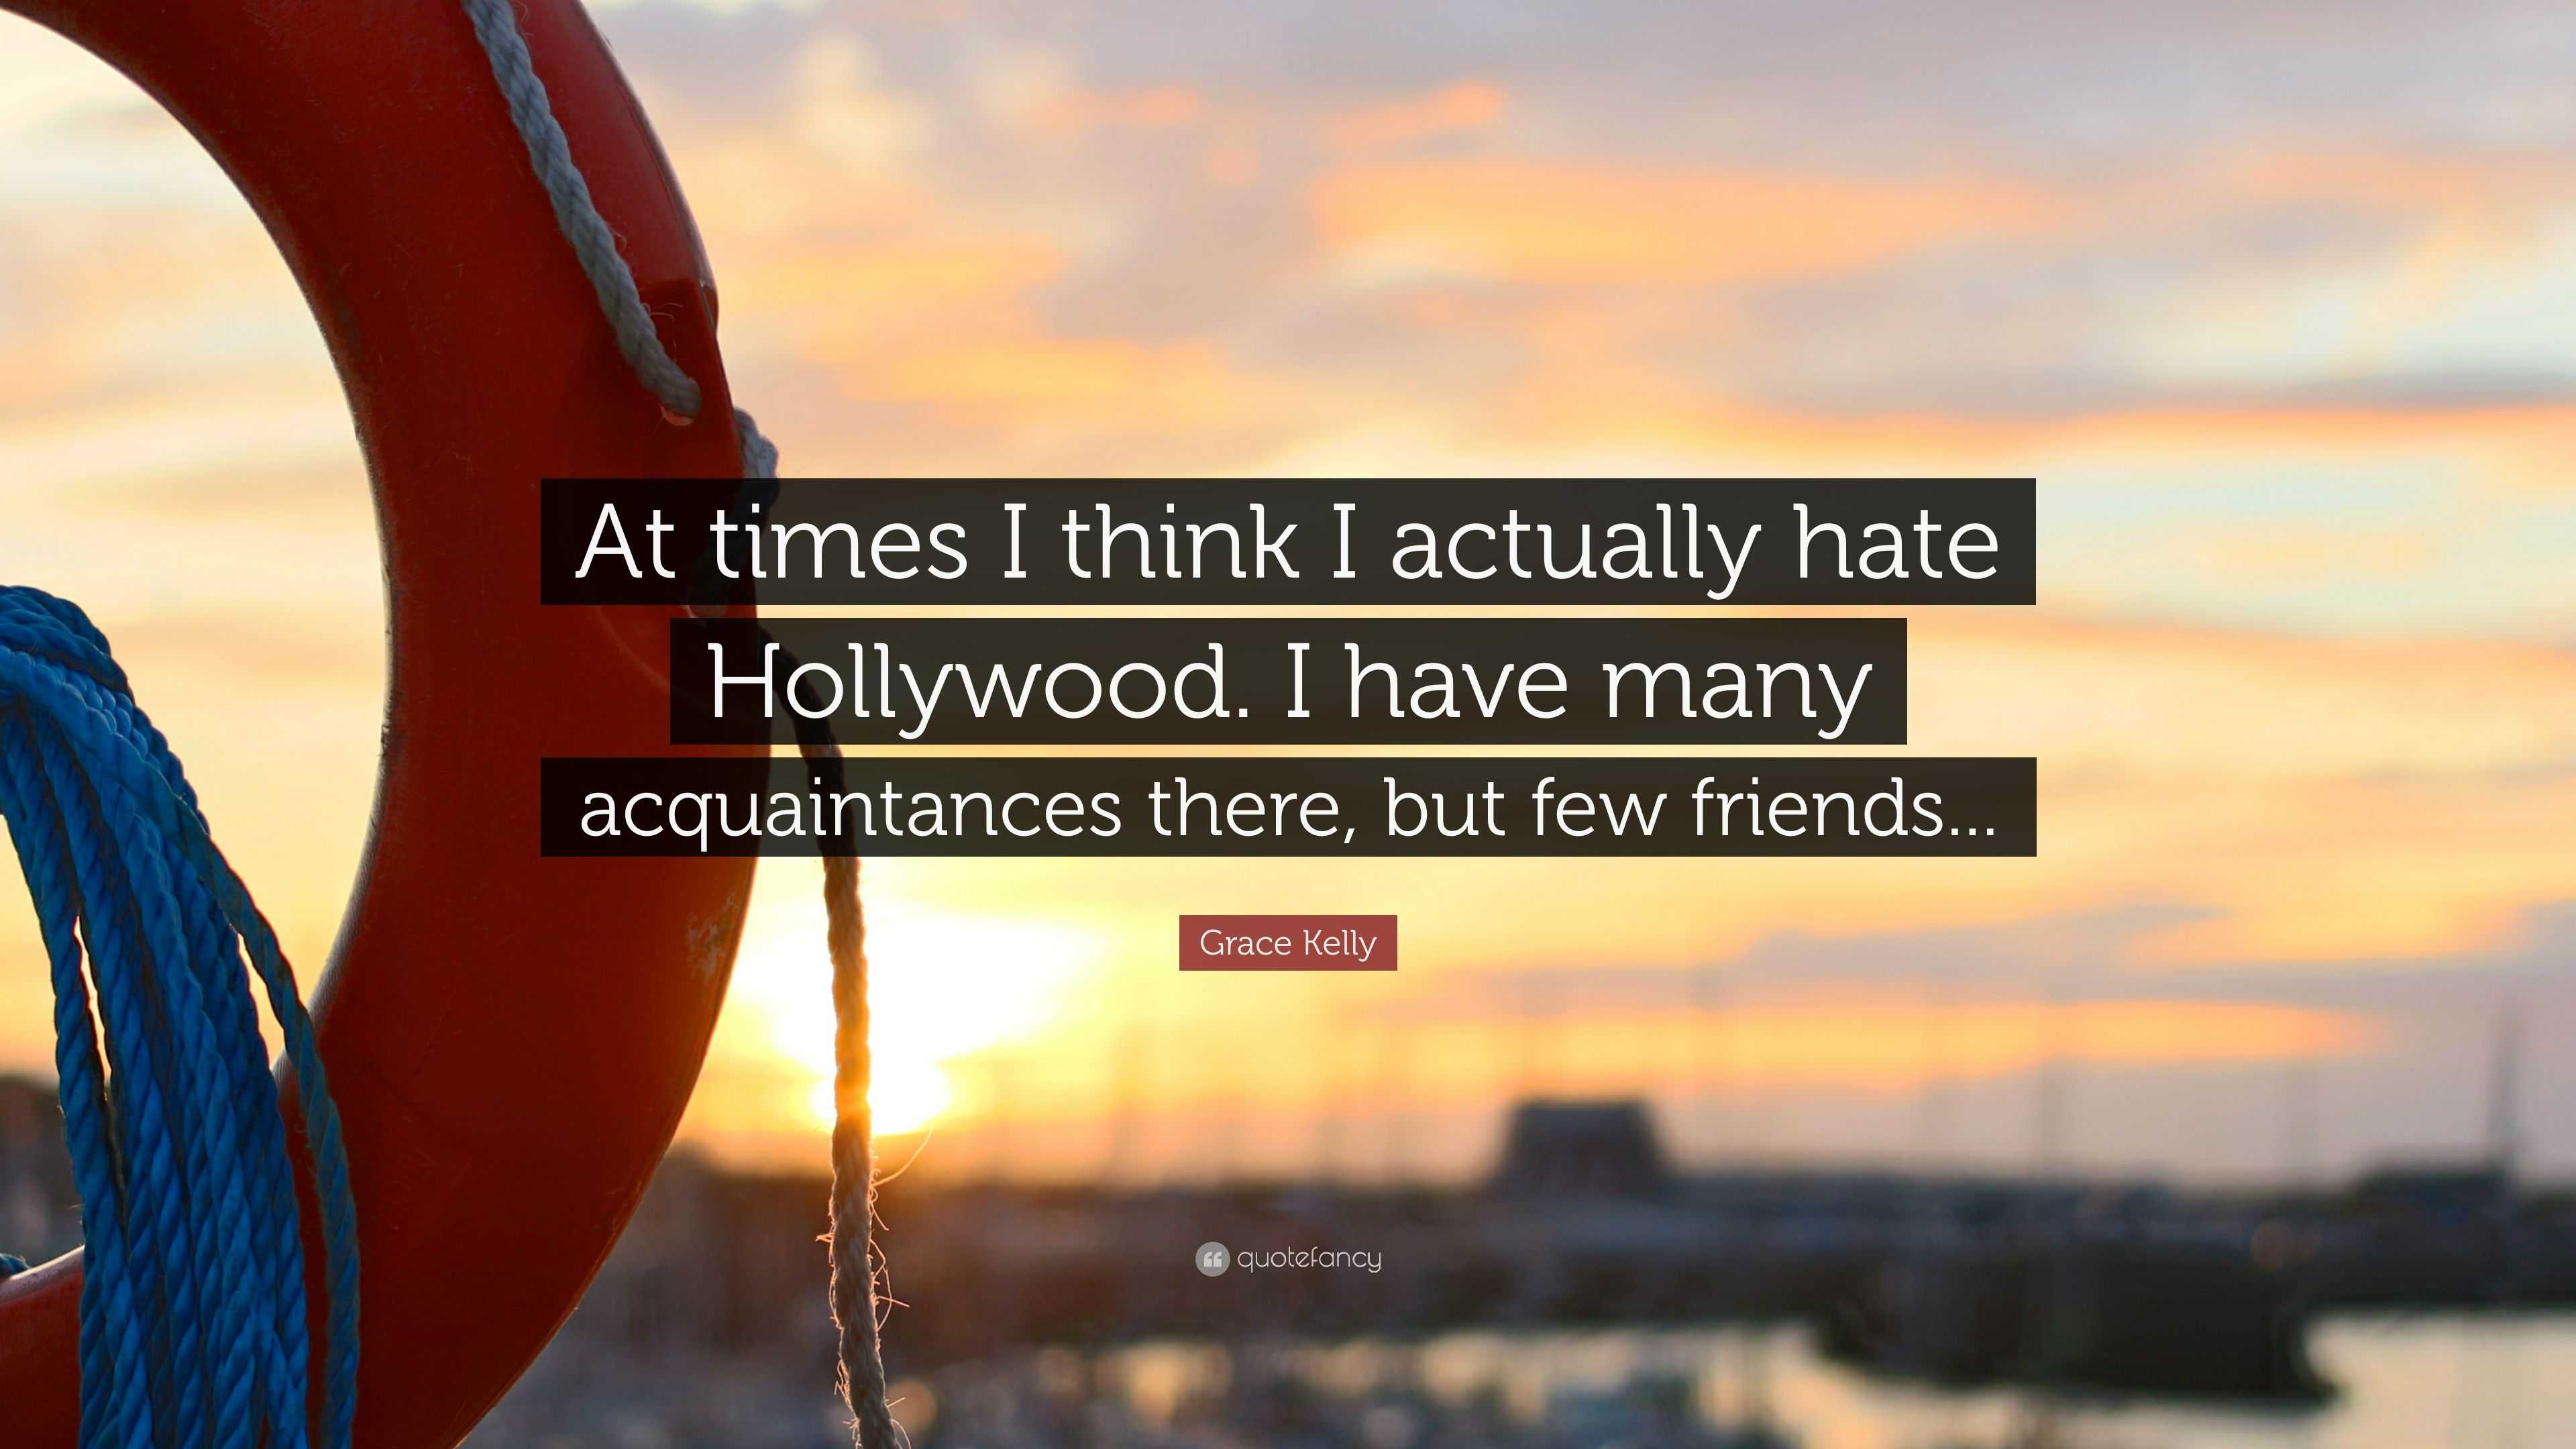 Grace Kelly Quote “At times I think I actually hate Hollywood I have